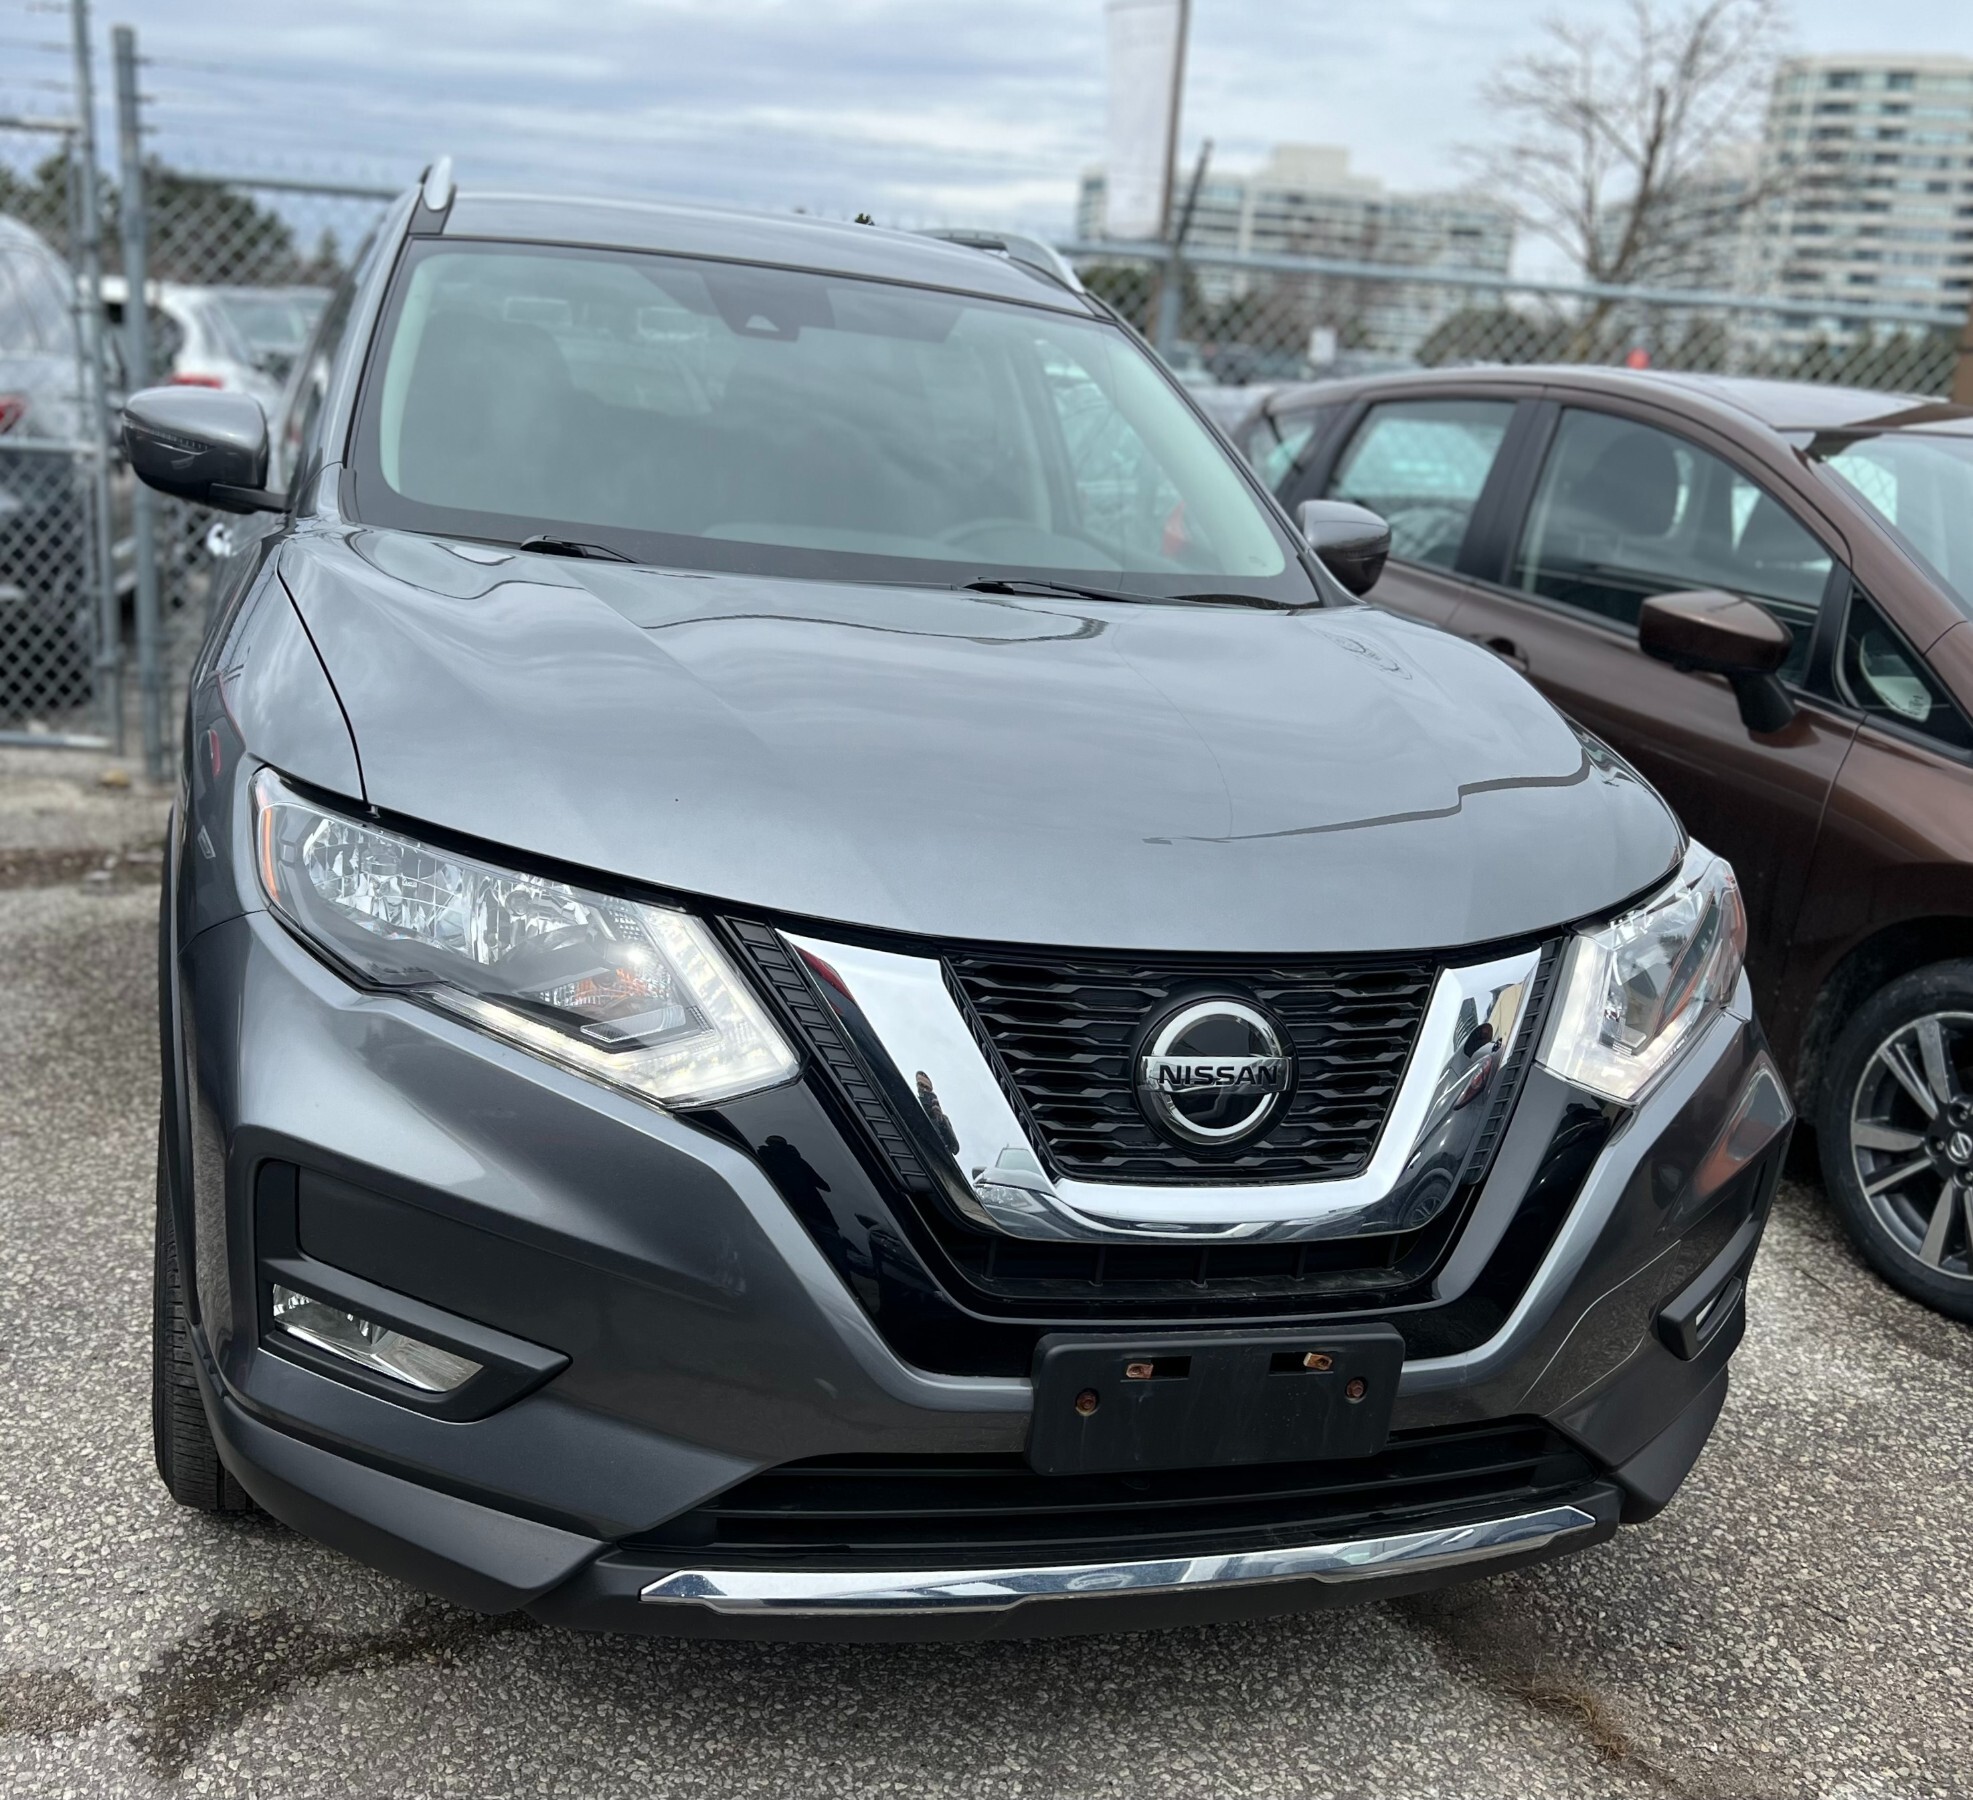 2020 Nissan Rogue SV - SALE EVENT MAY 24- MAY 25